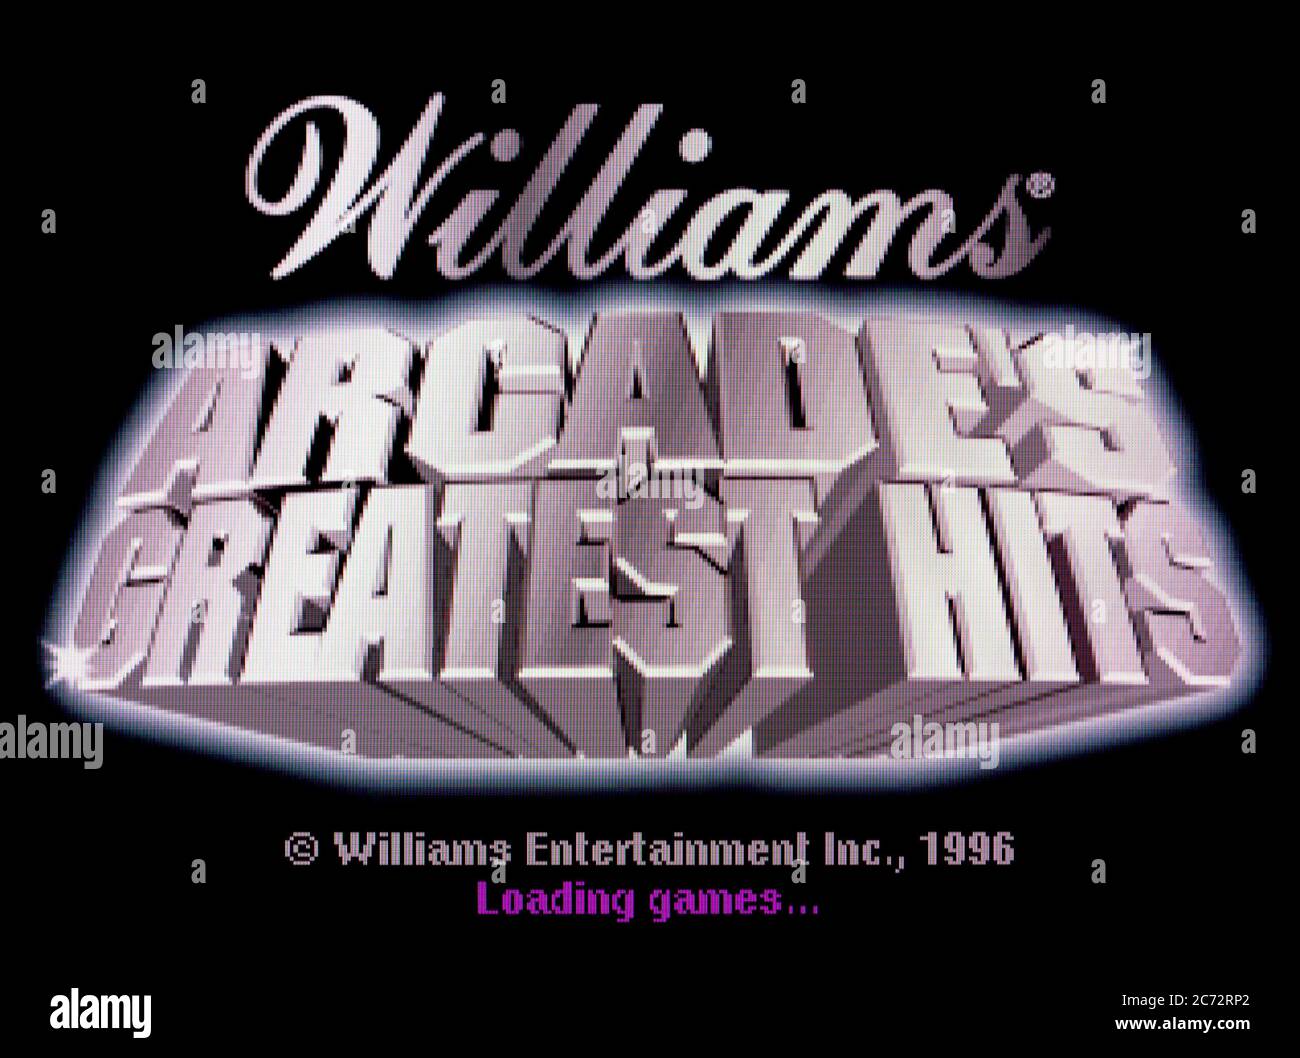 Williams Arcade's Greatest Hits - Sega Saturn Videogame - Editorial use only Stock Photo